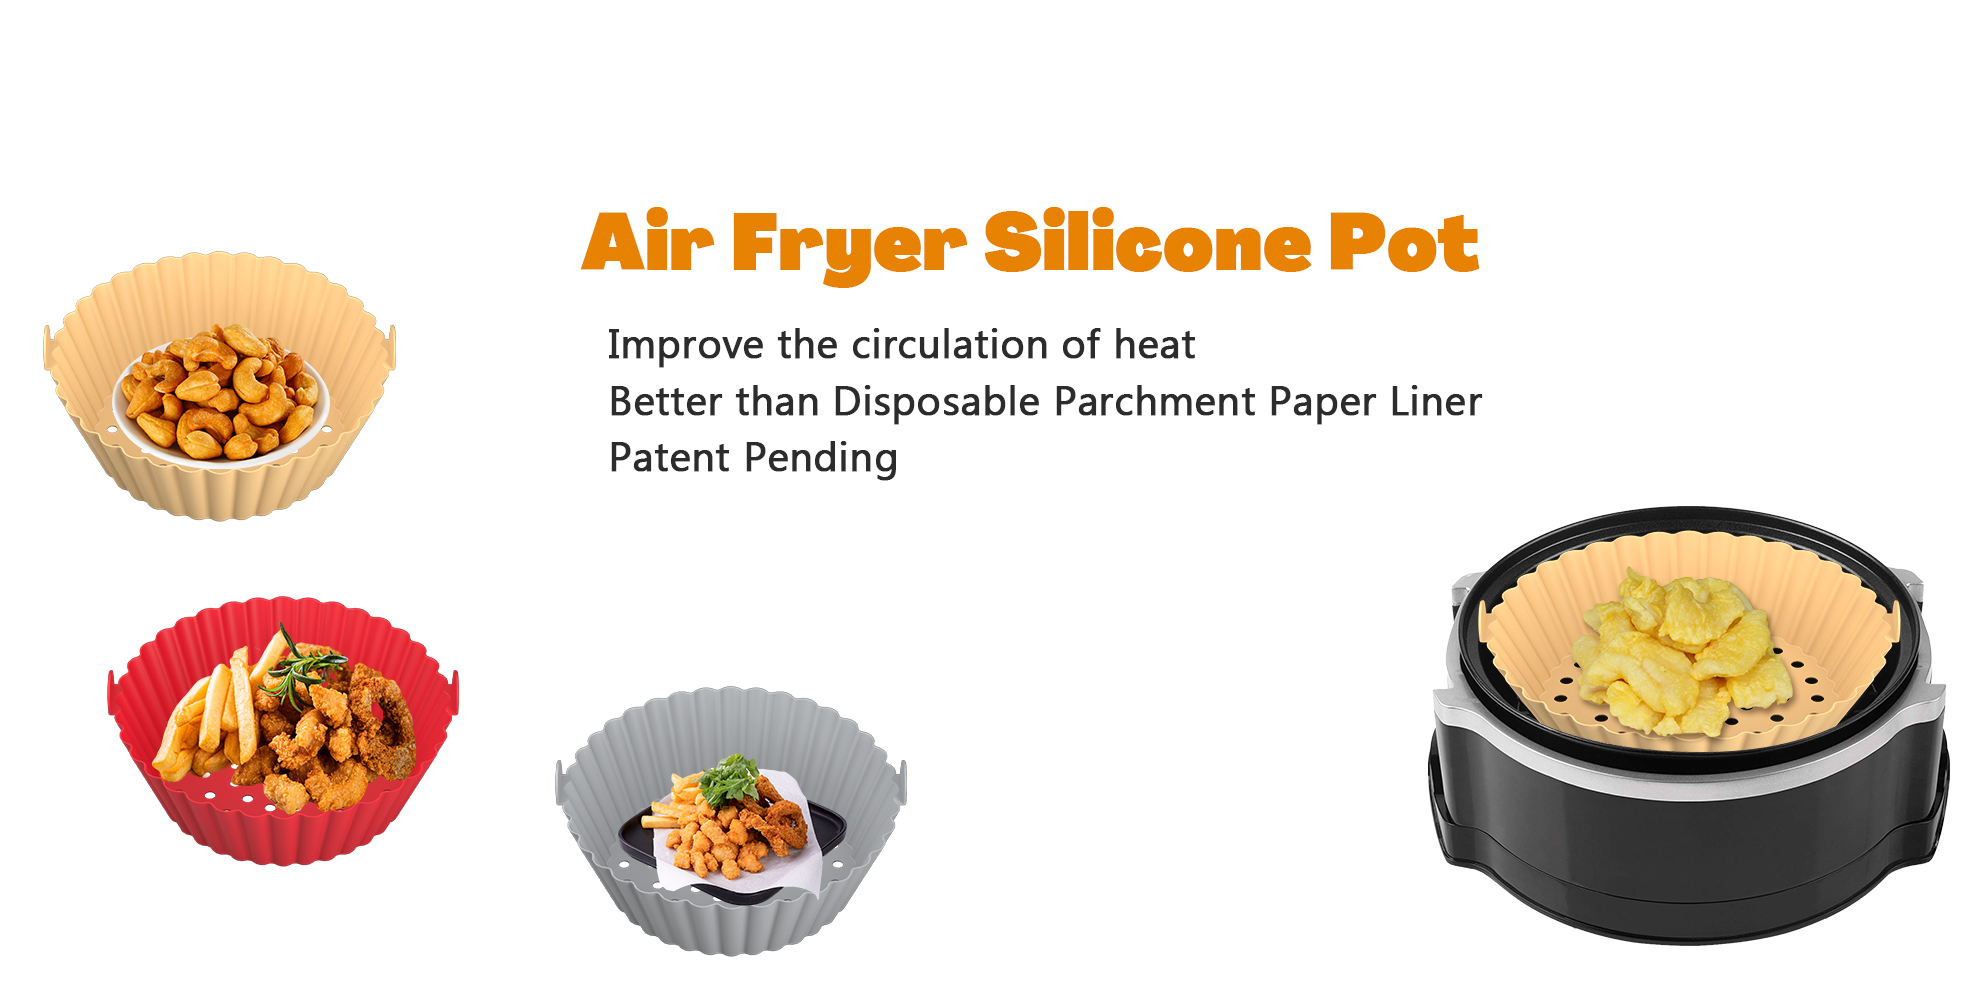 Custom Design Air Fryer Silicone Pot Replacement of Parchment Paper Liners